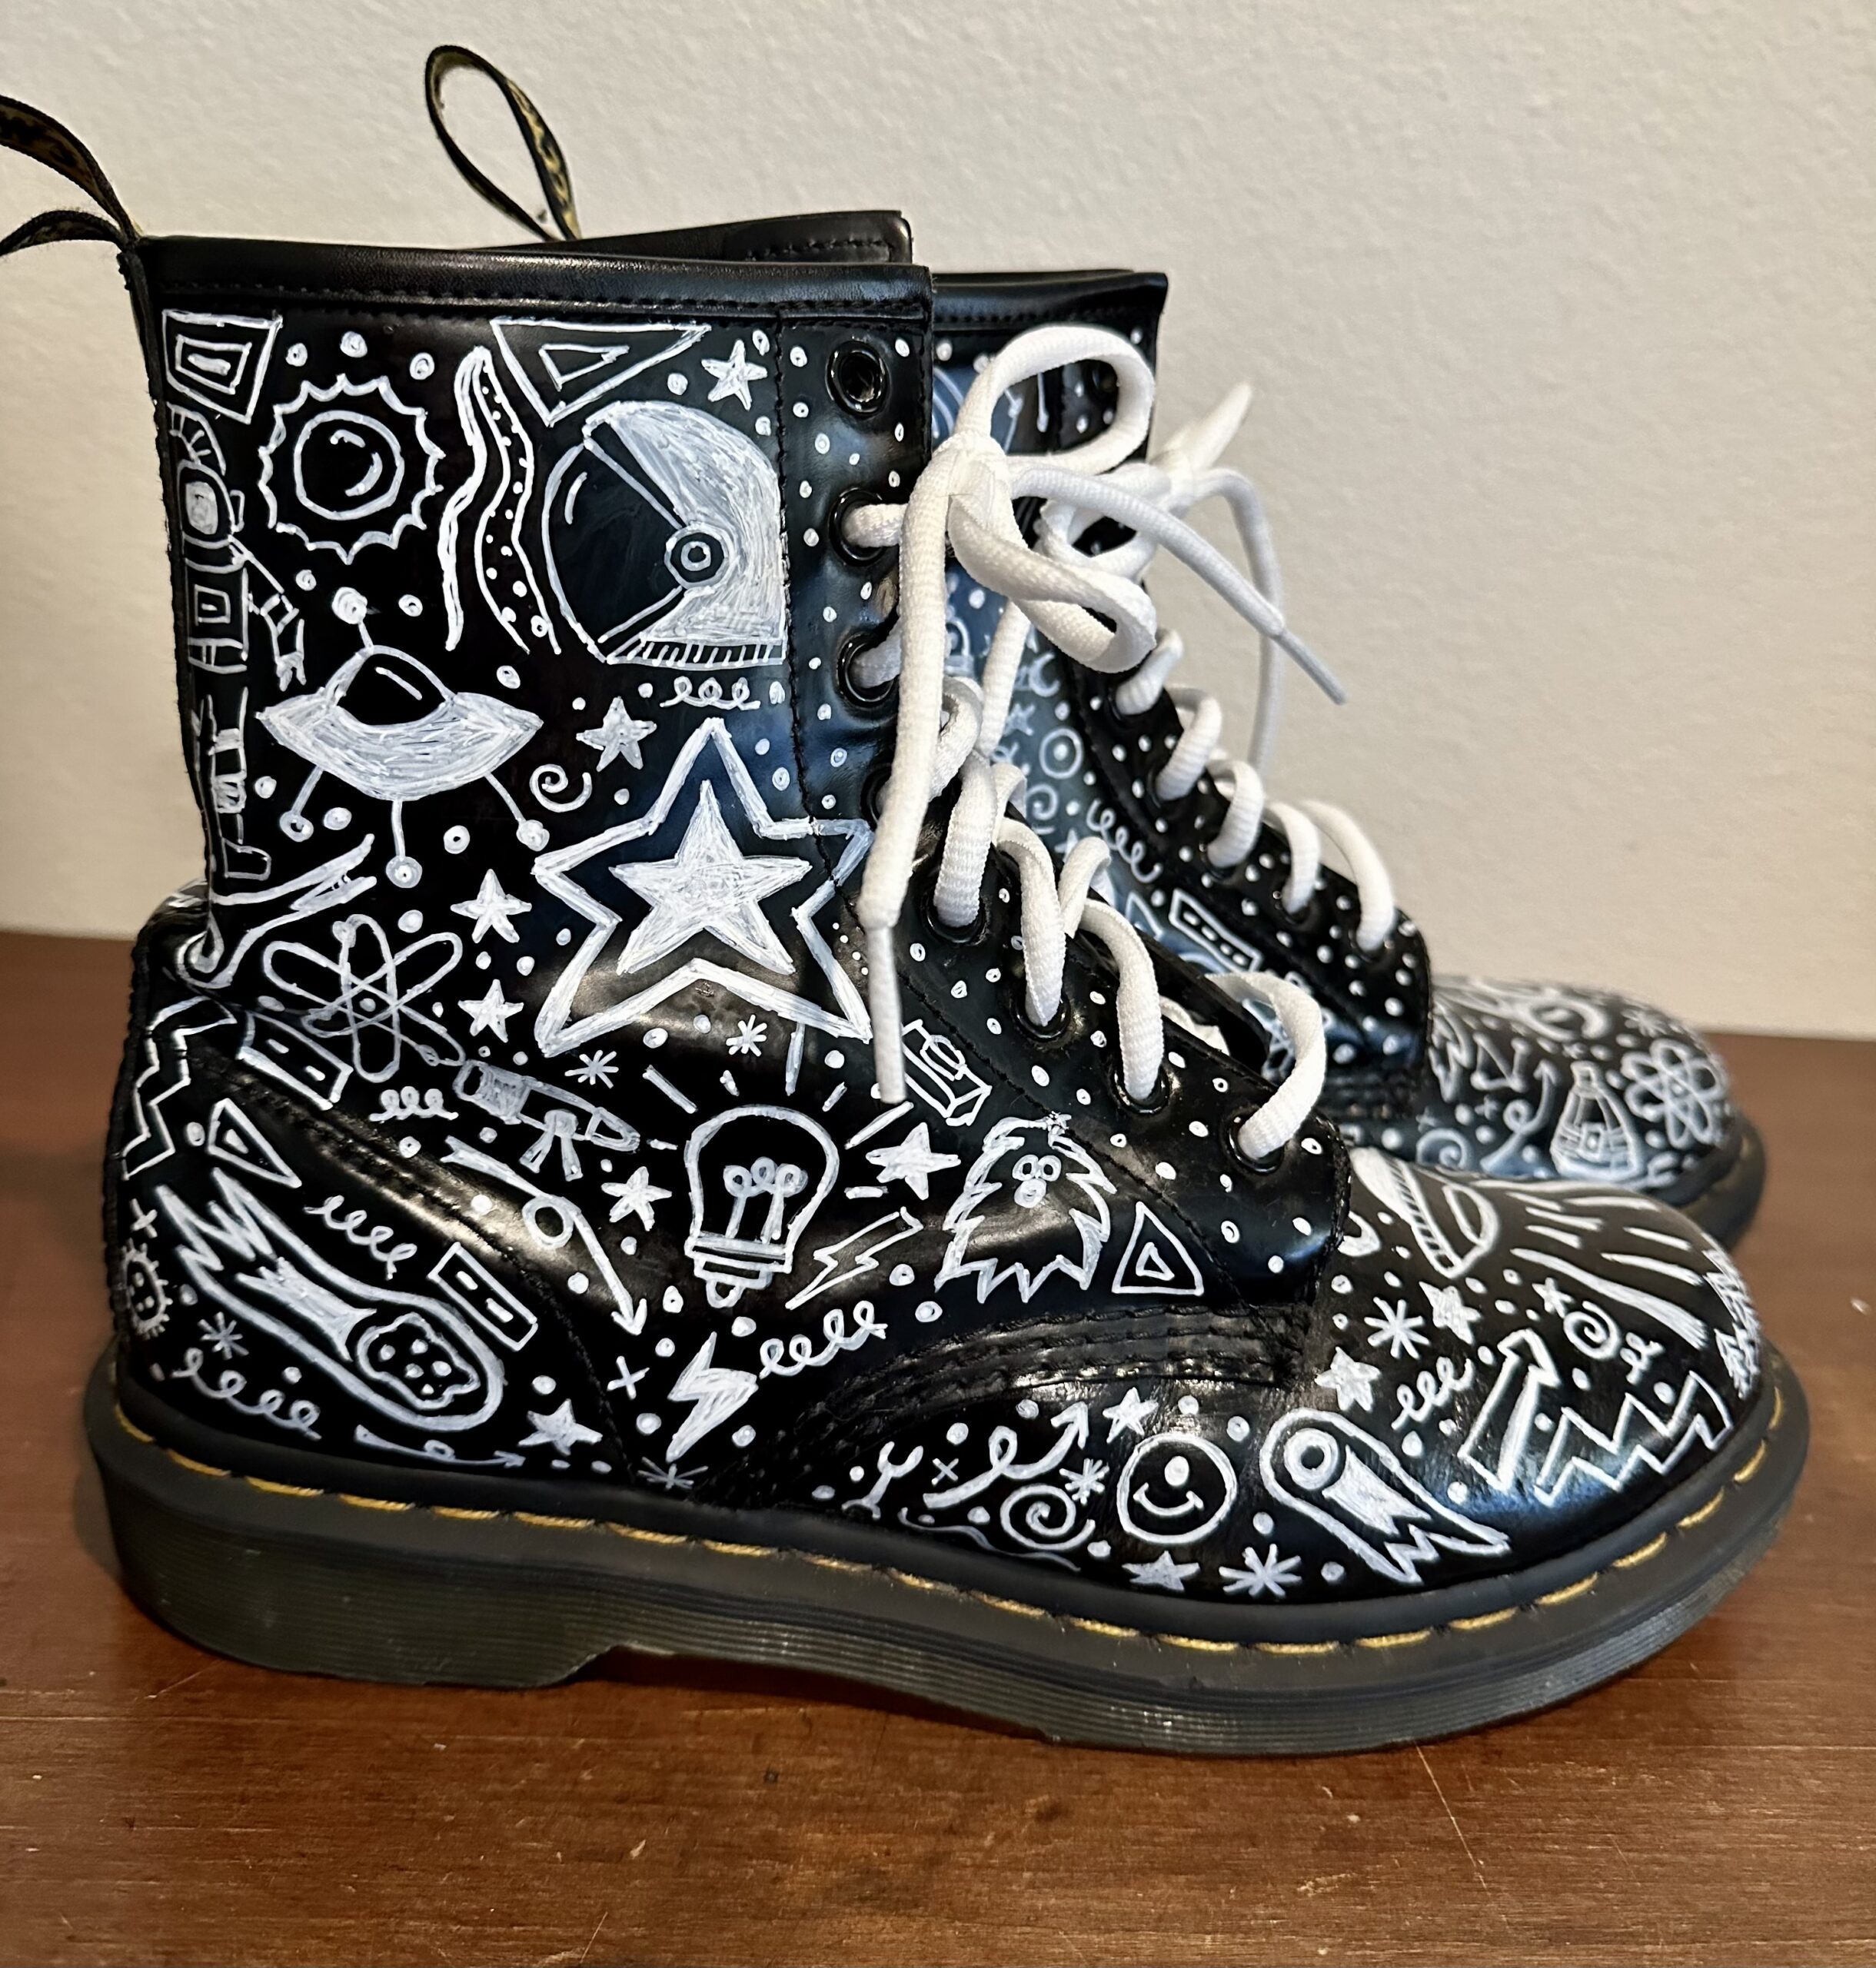 A pair of black and white dr martens boots with doodles on them.